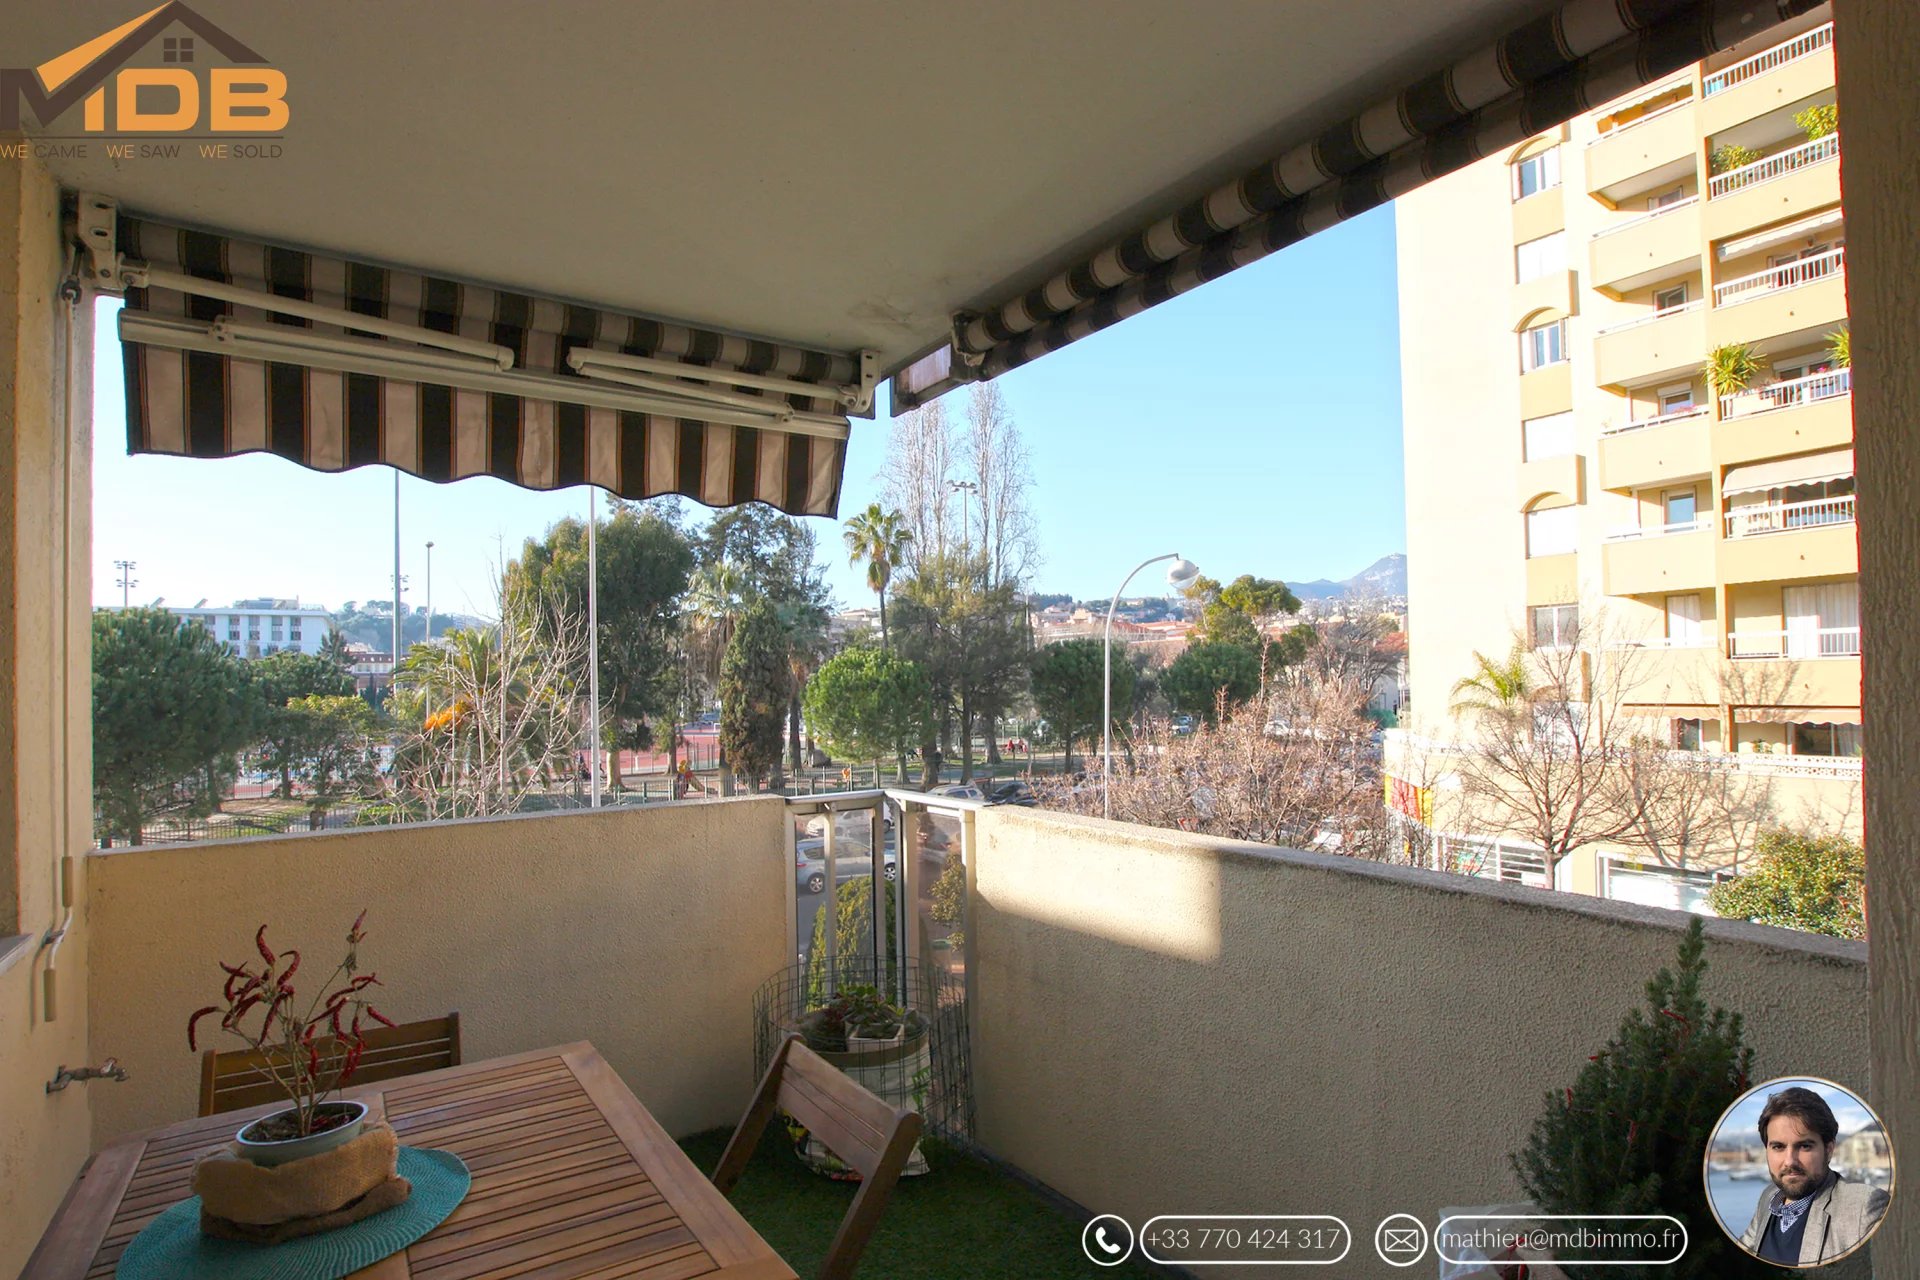 Nice St Jean d'Angely - Magnificent 2 room apartment with two balconies, completely renovated